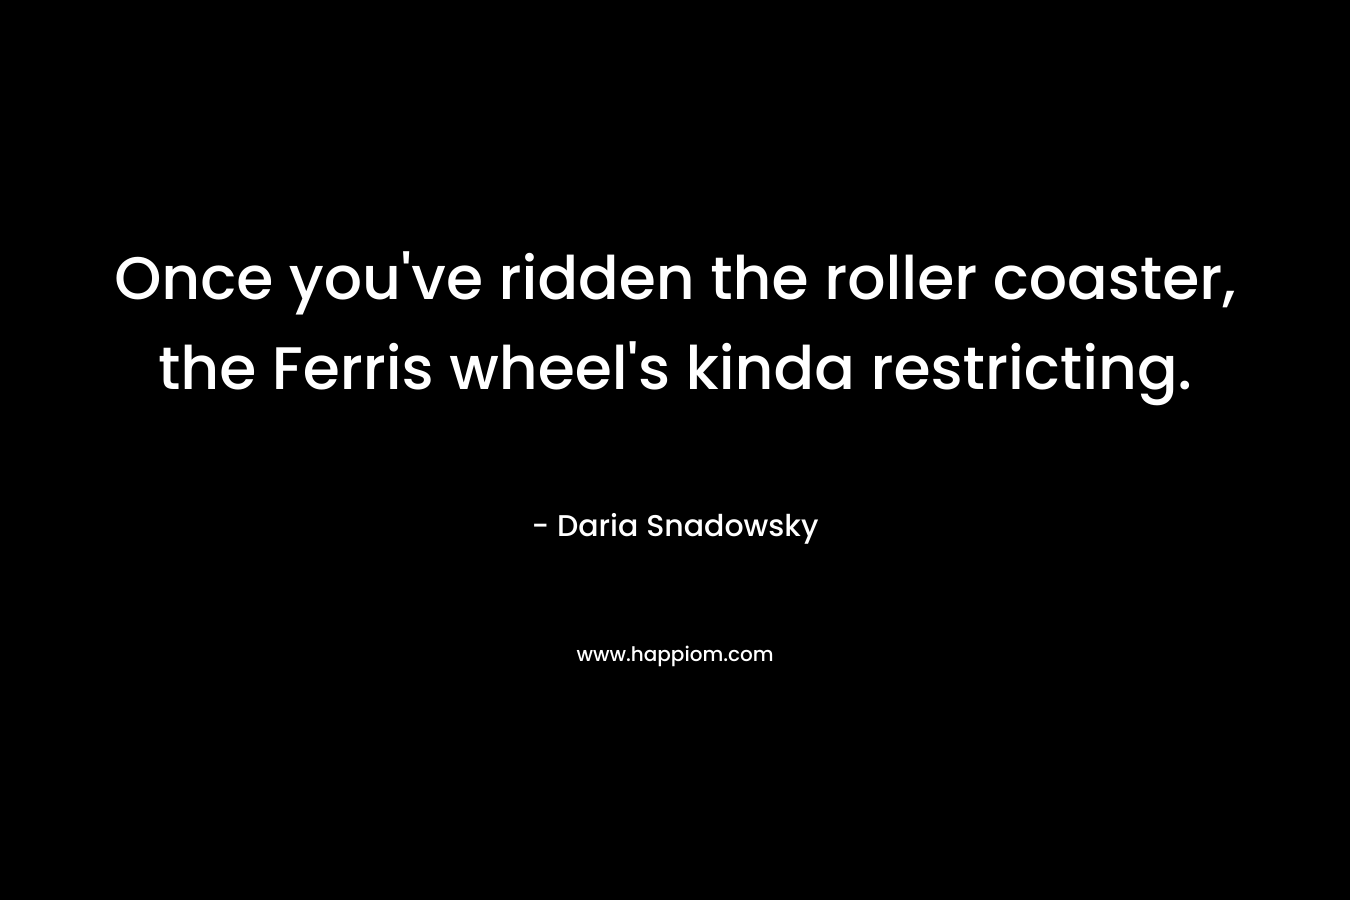 Once you’ve ridden the roller coaster, the Ferris wheel’s kinda restricting. – Daria Snadowsky